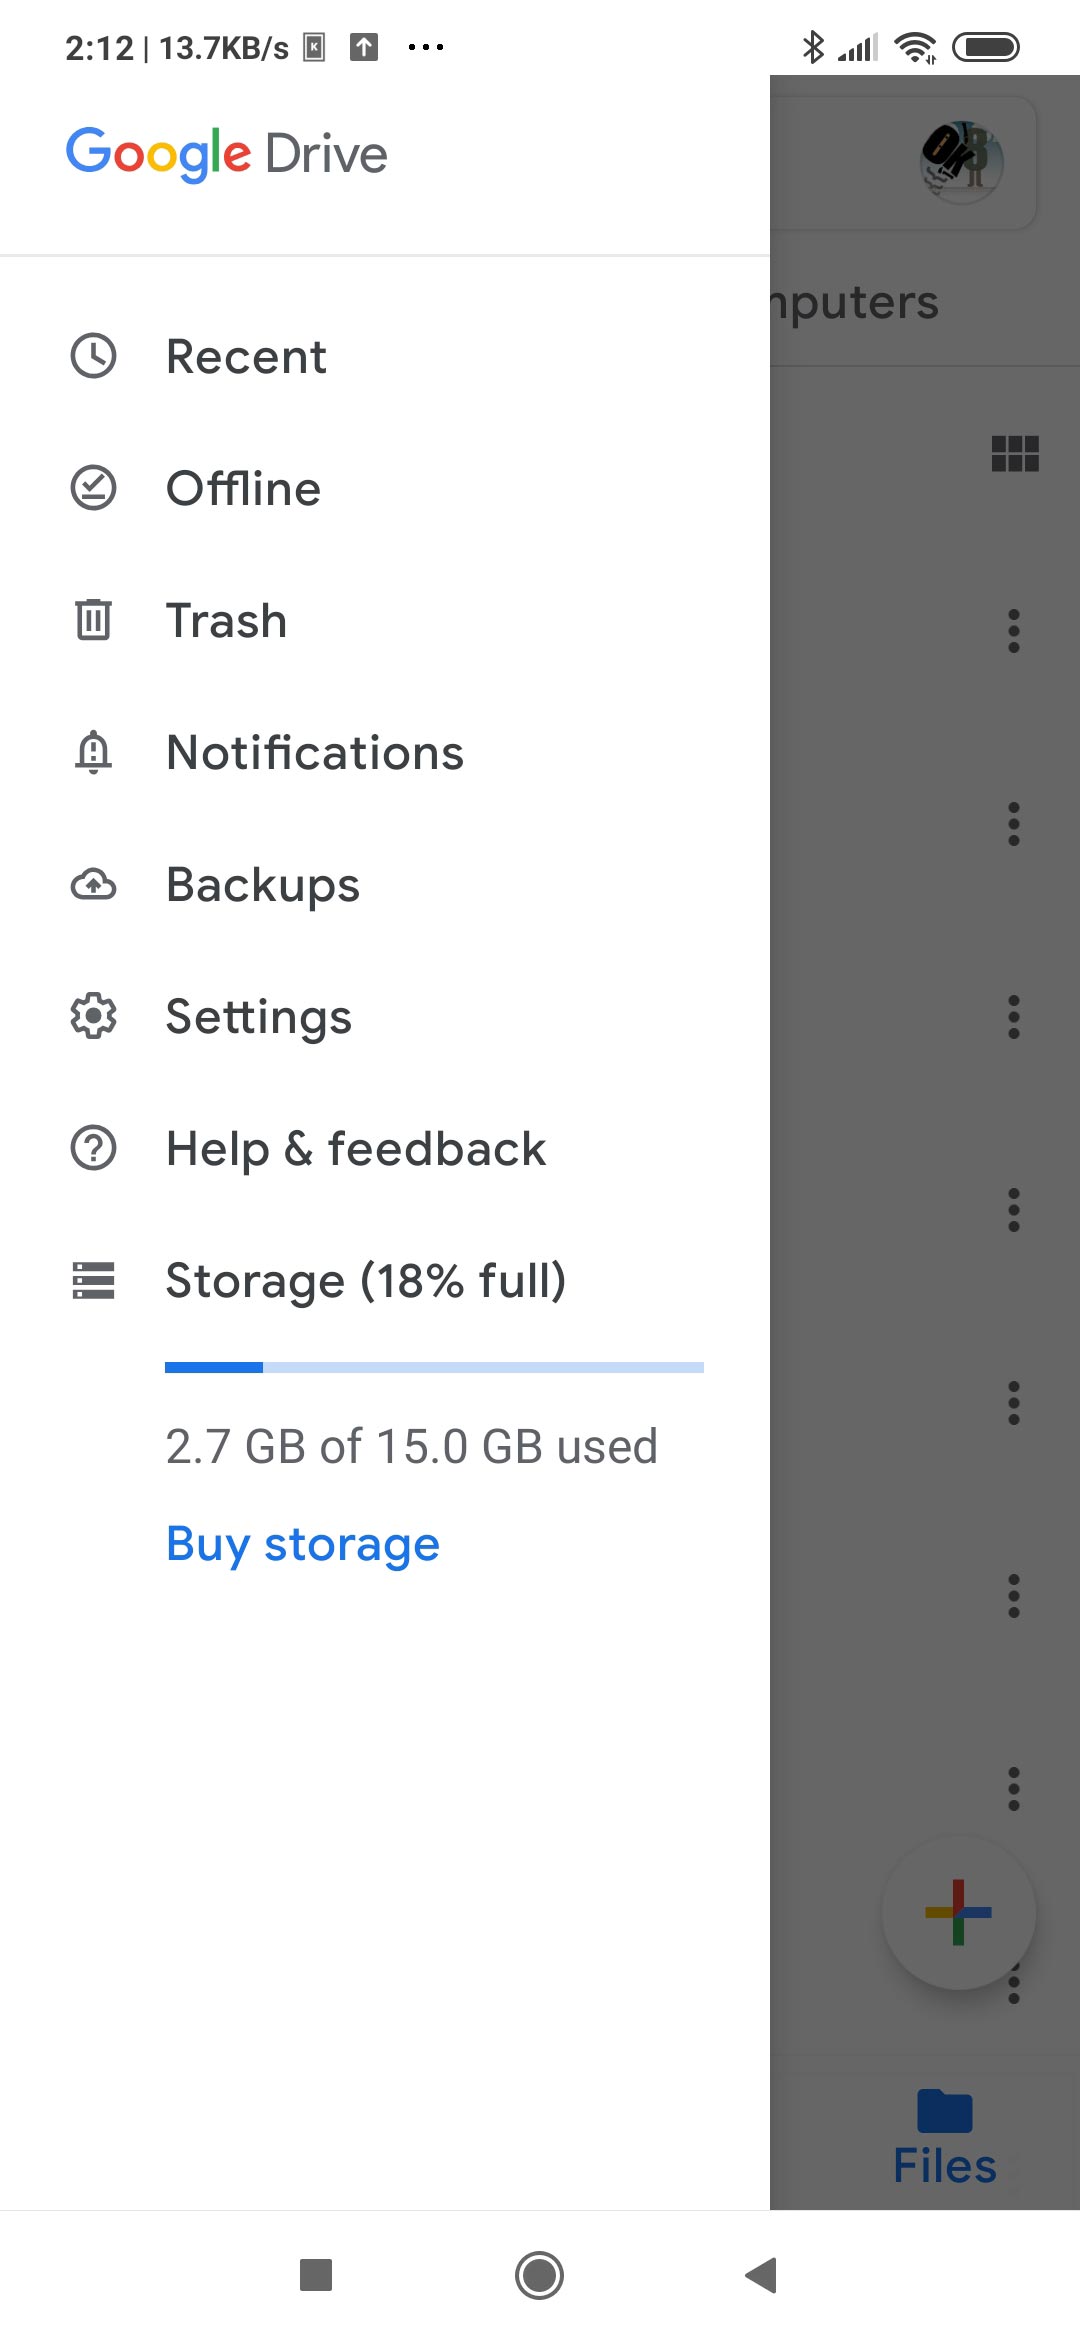 It's worth checking Google Drive's own Trash folder in case your files found their way there.